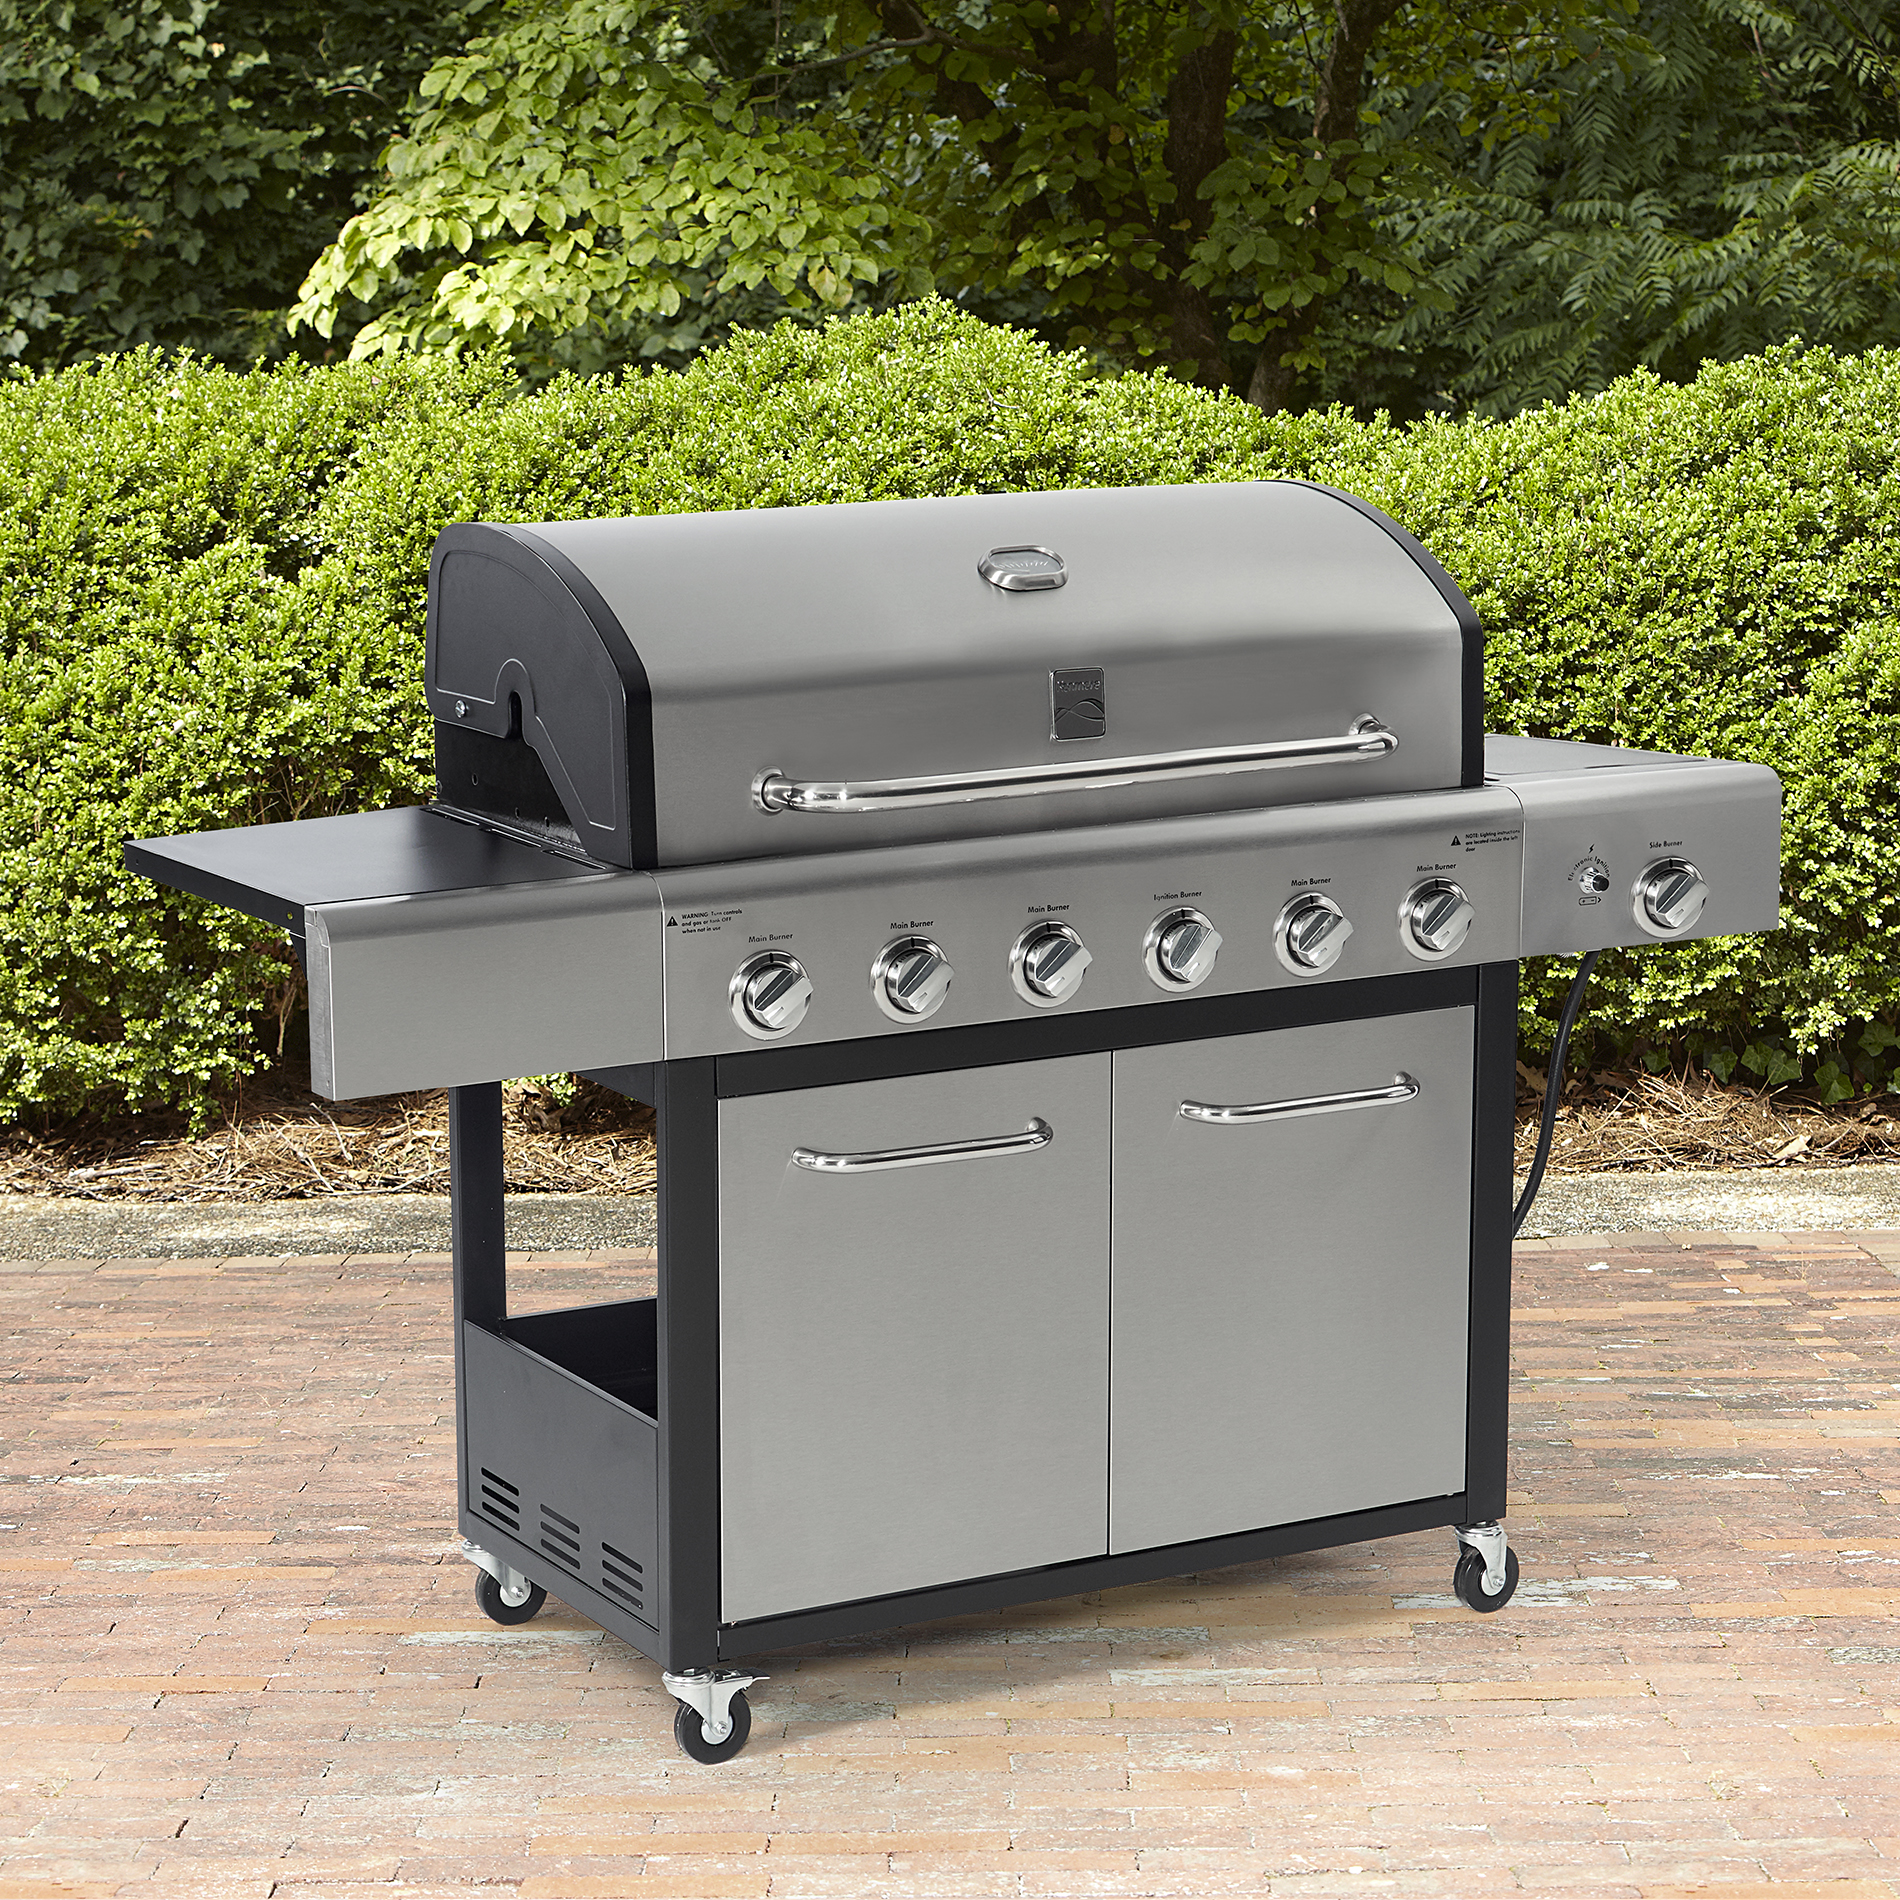 Kenmore 6 Burner Lp Gas Grill With Side Burner Black Stainless Steel,Instructions Checkers Rules